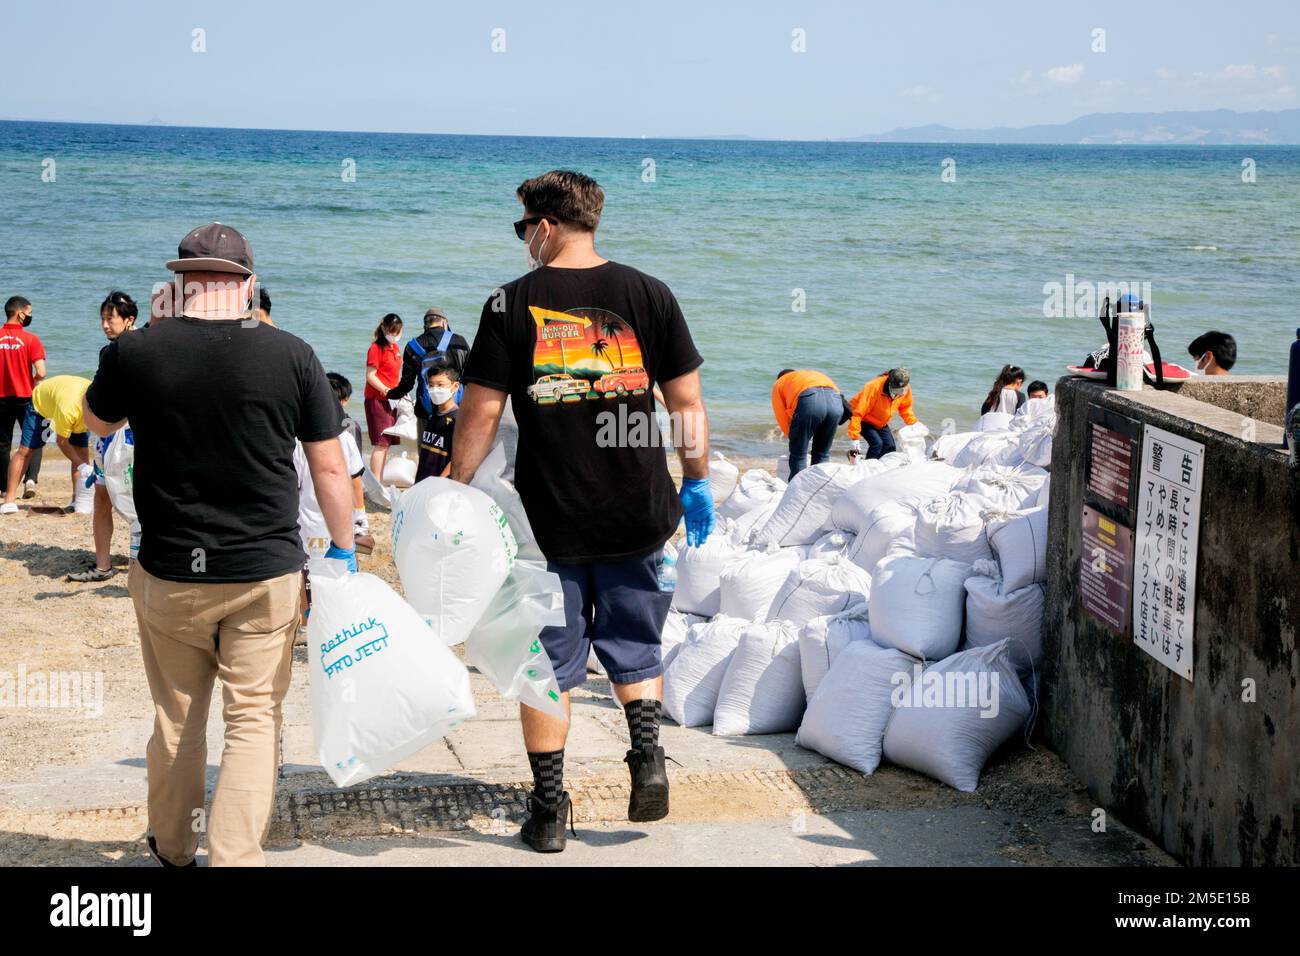 Marines with bags head out to the beach for pumice cleanup, walking by the piles of bags which were already gathered in previous cleanups. Stock Photo